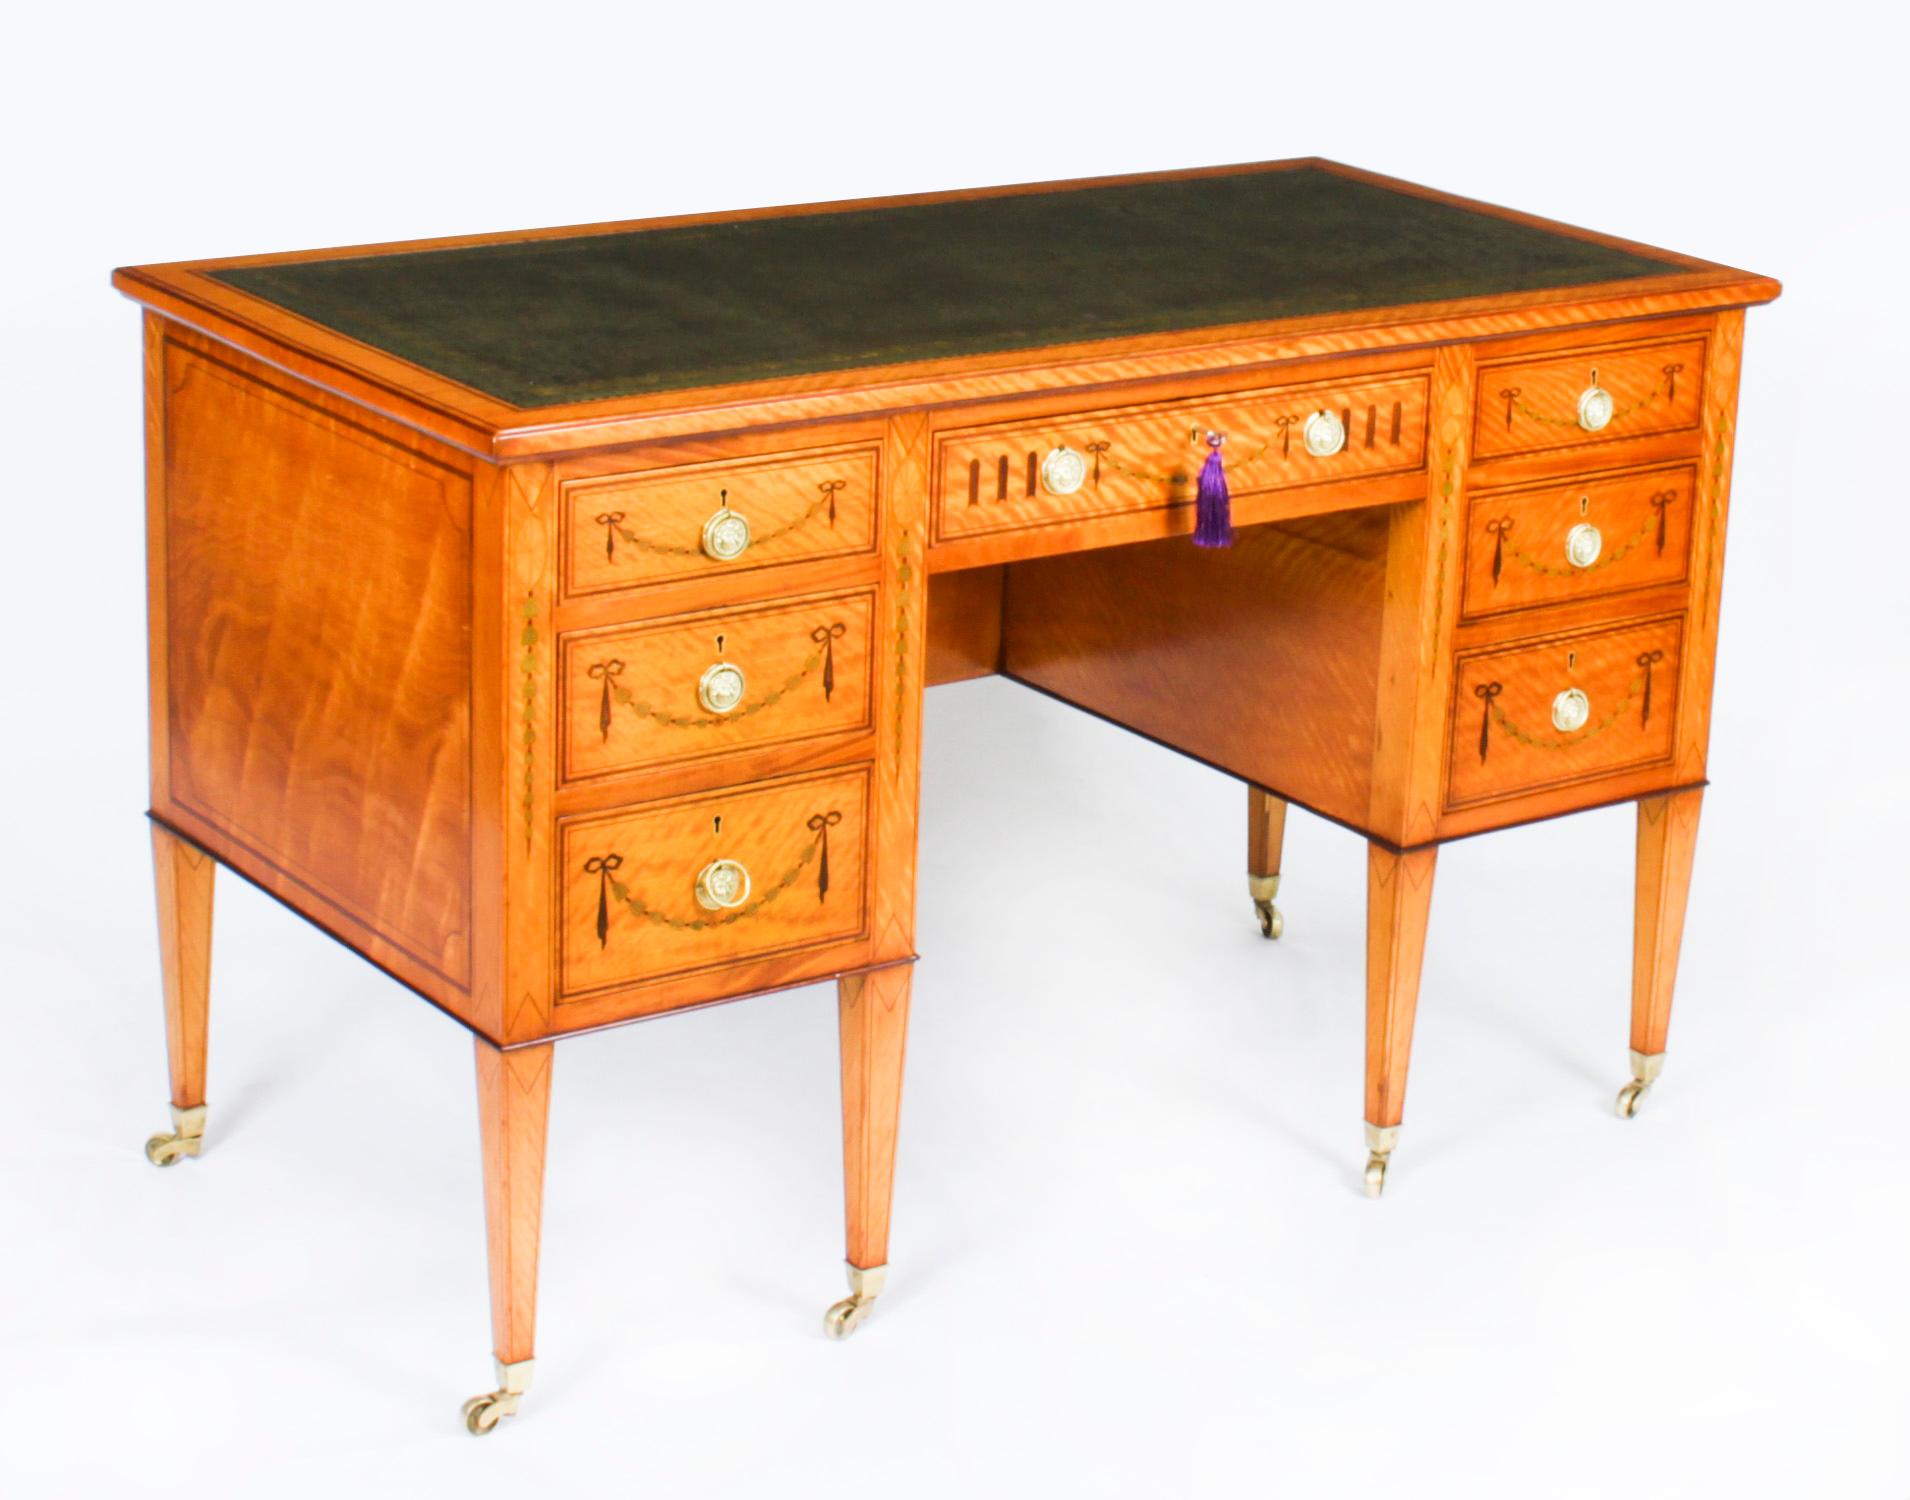 Antique Inlaid Satinwood Writing Table Desk by Edwards & Roberts, 19th Century For Sale 14